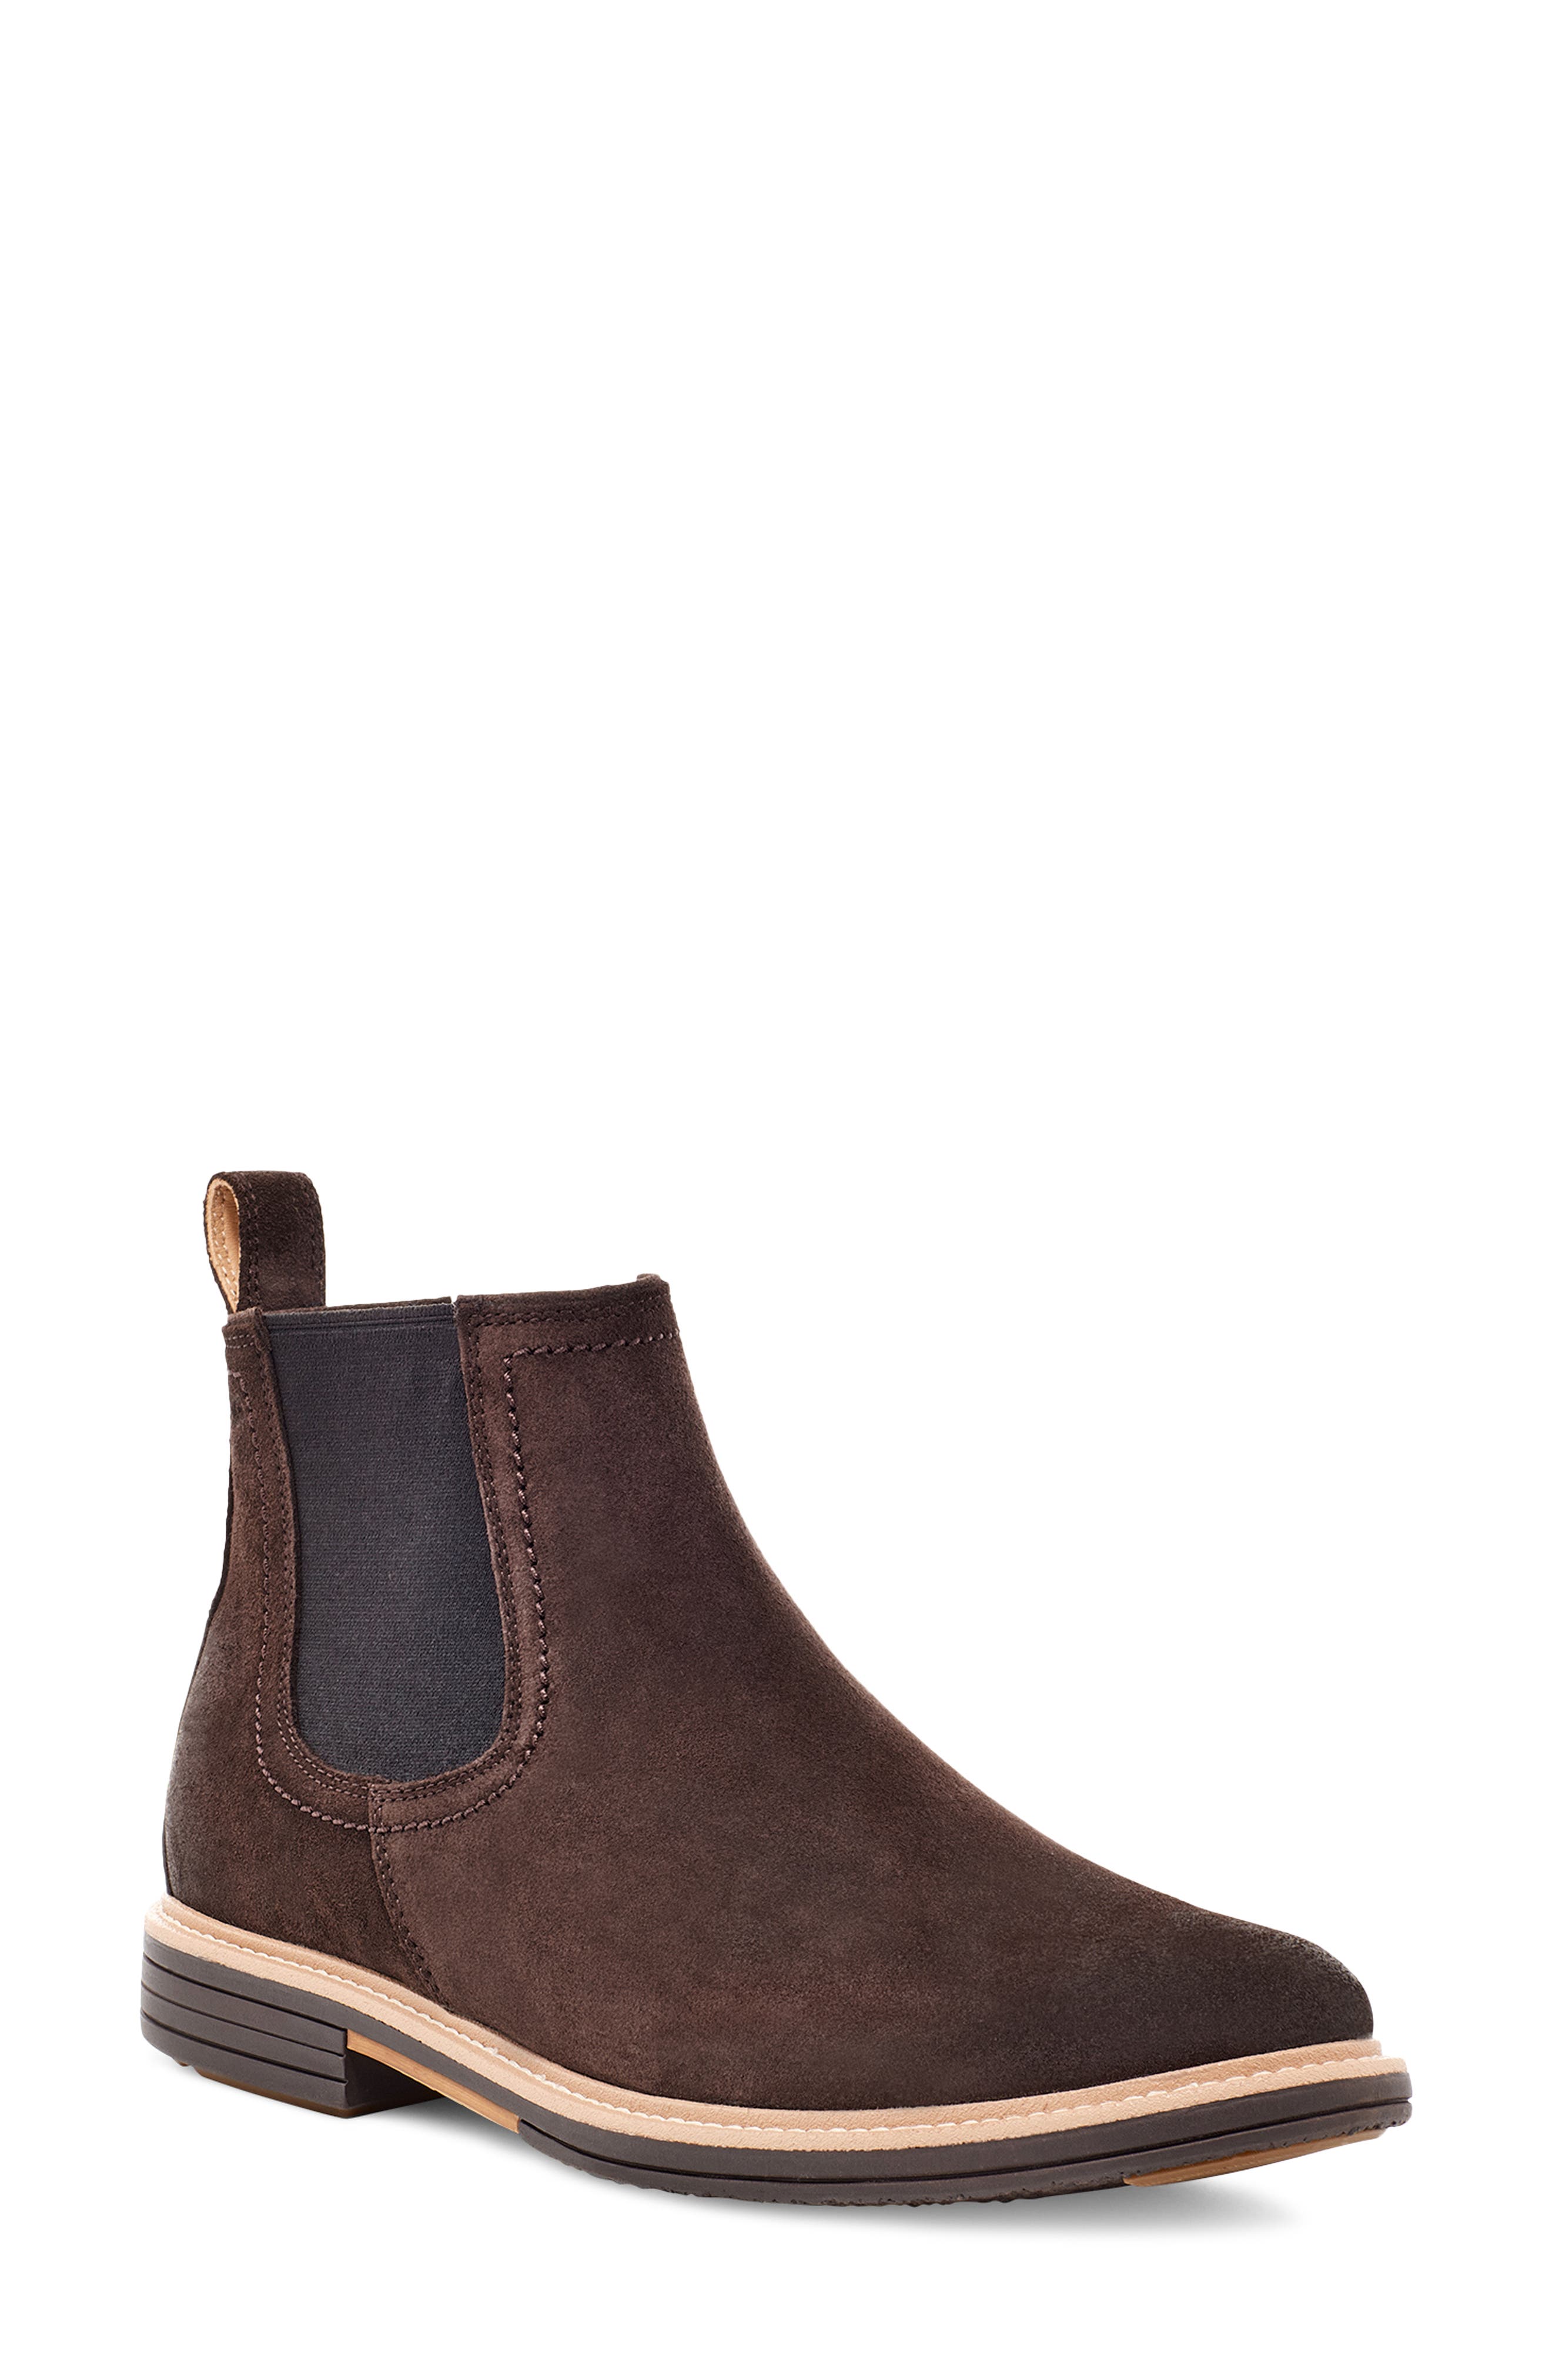 ugg boots clearance men